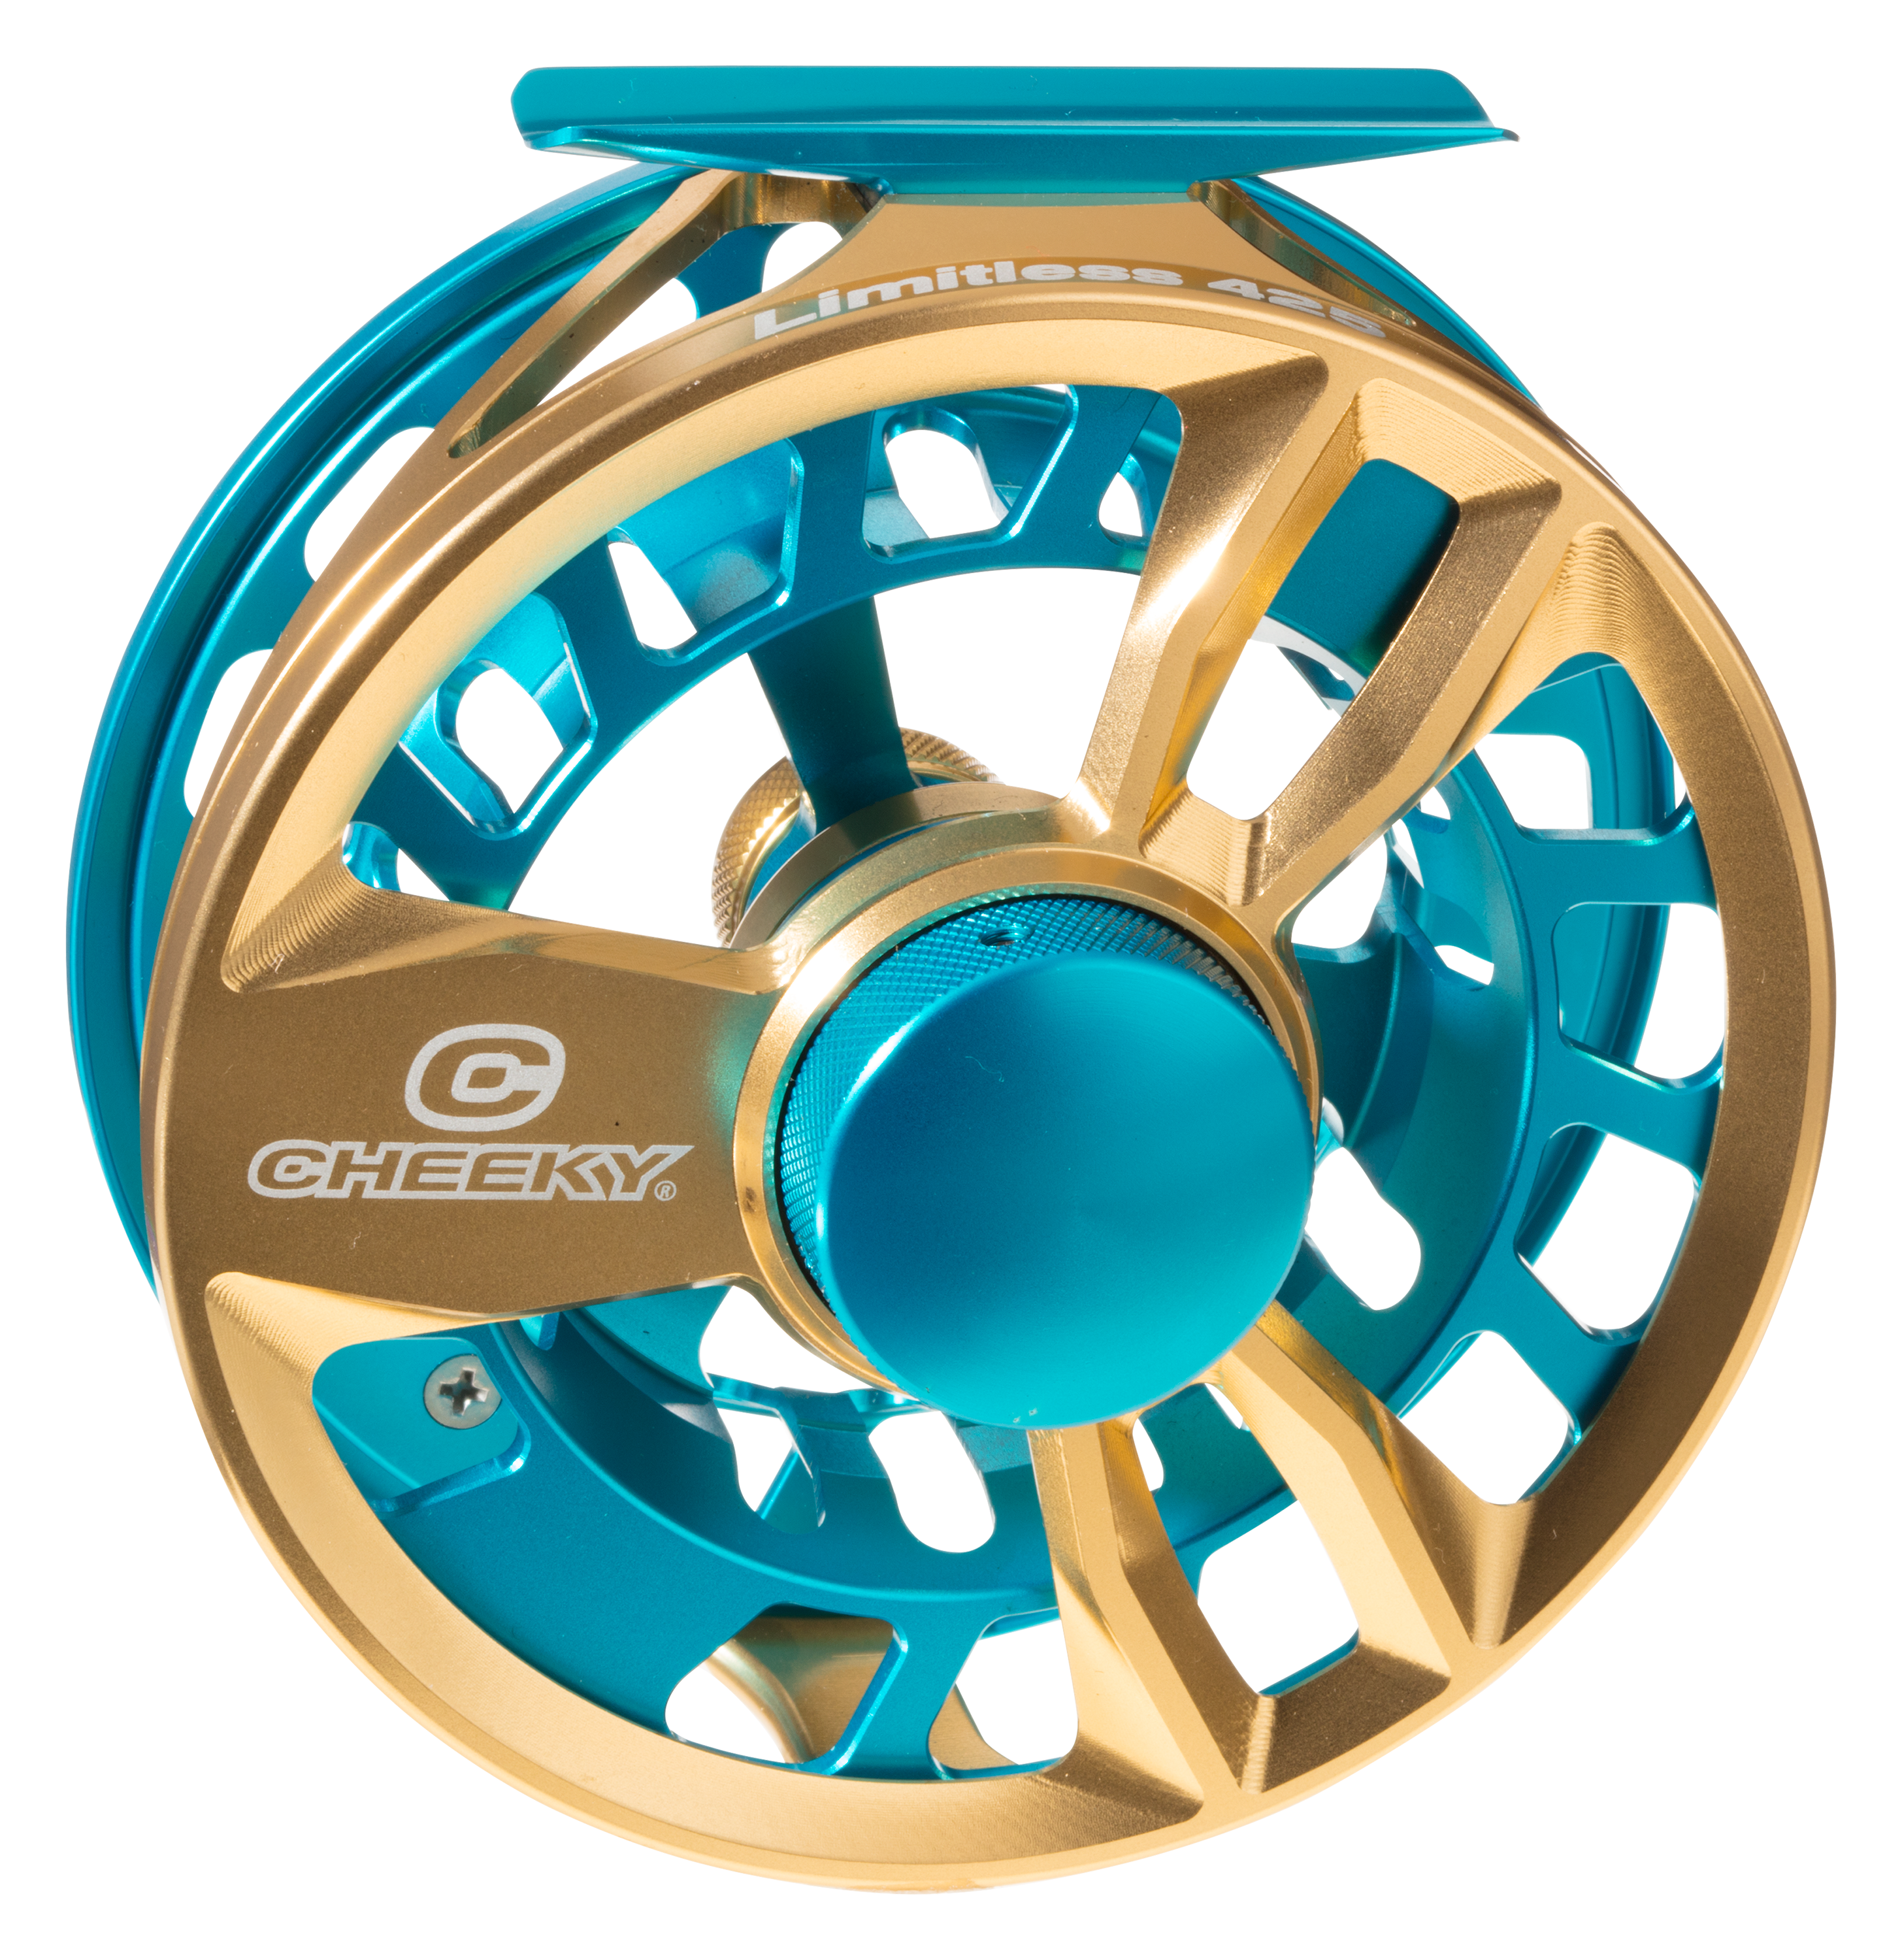 Cheeky Limitless Fly Reel - Blue Gold - Model 2003